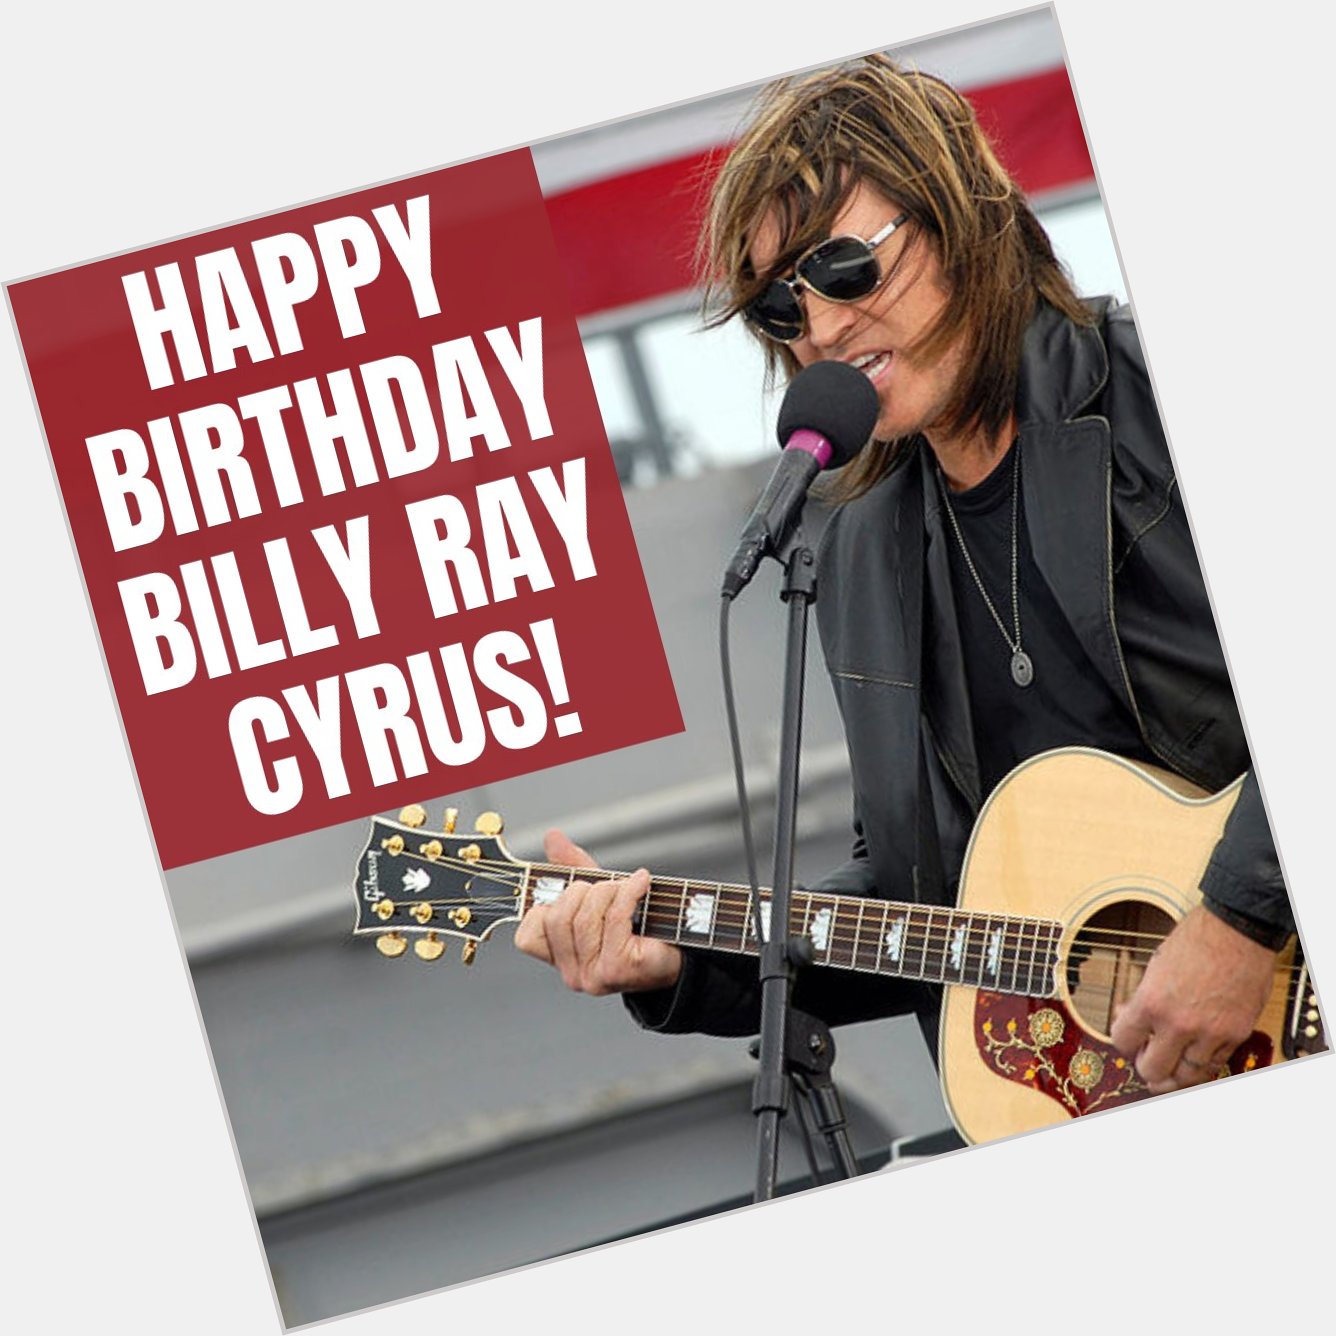 Happy Birthday to Billy Ray Cyrus! What\s your favorite song by him? 